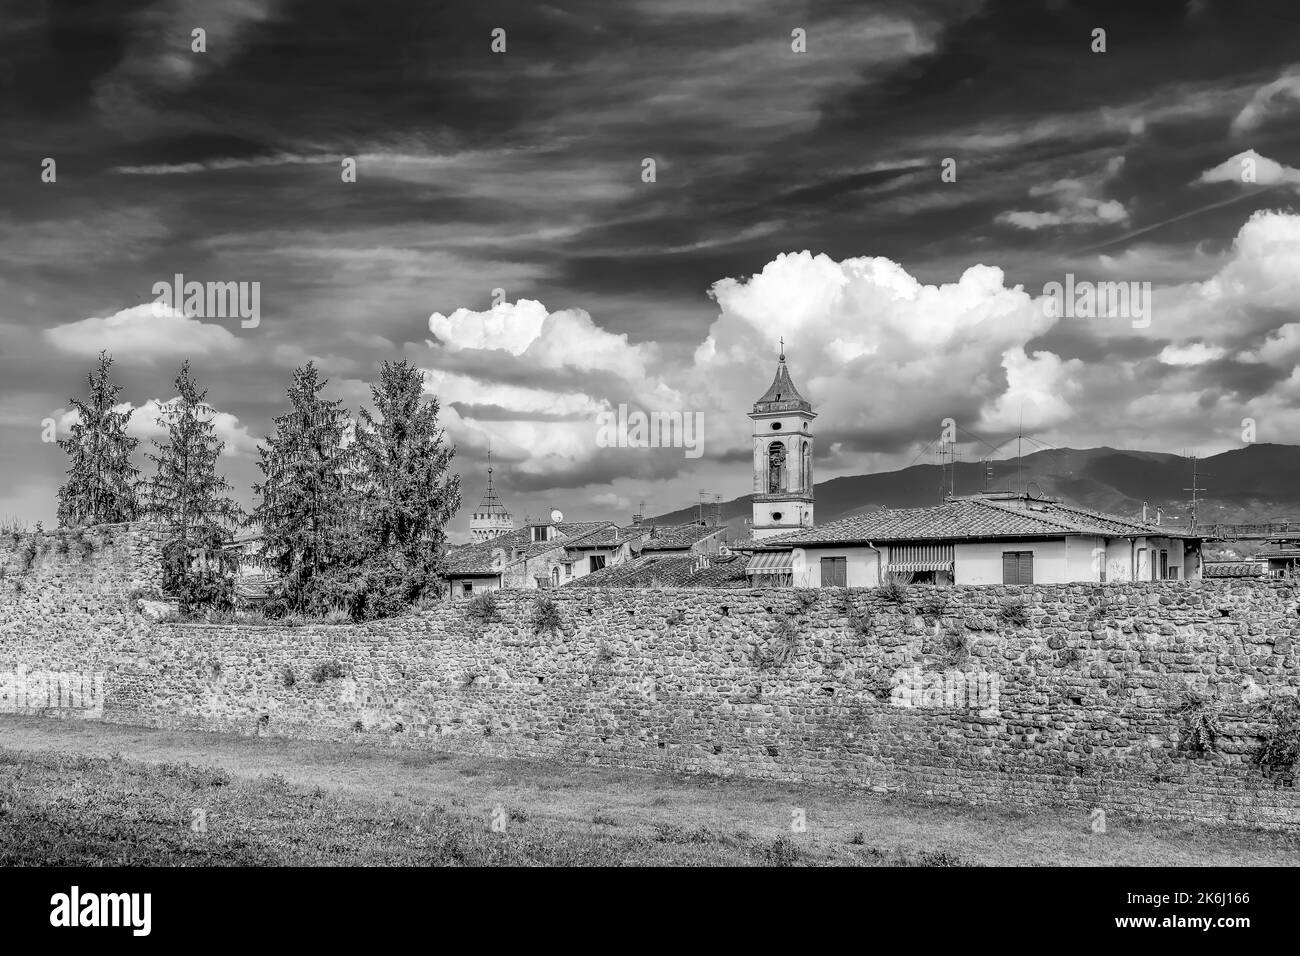 A glimpse of the historic center of Figline Valdarno, Florence, Italy, seen from the ancient perimeter walls, in black and white Stock Photo